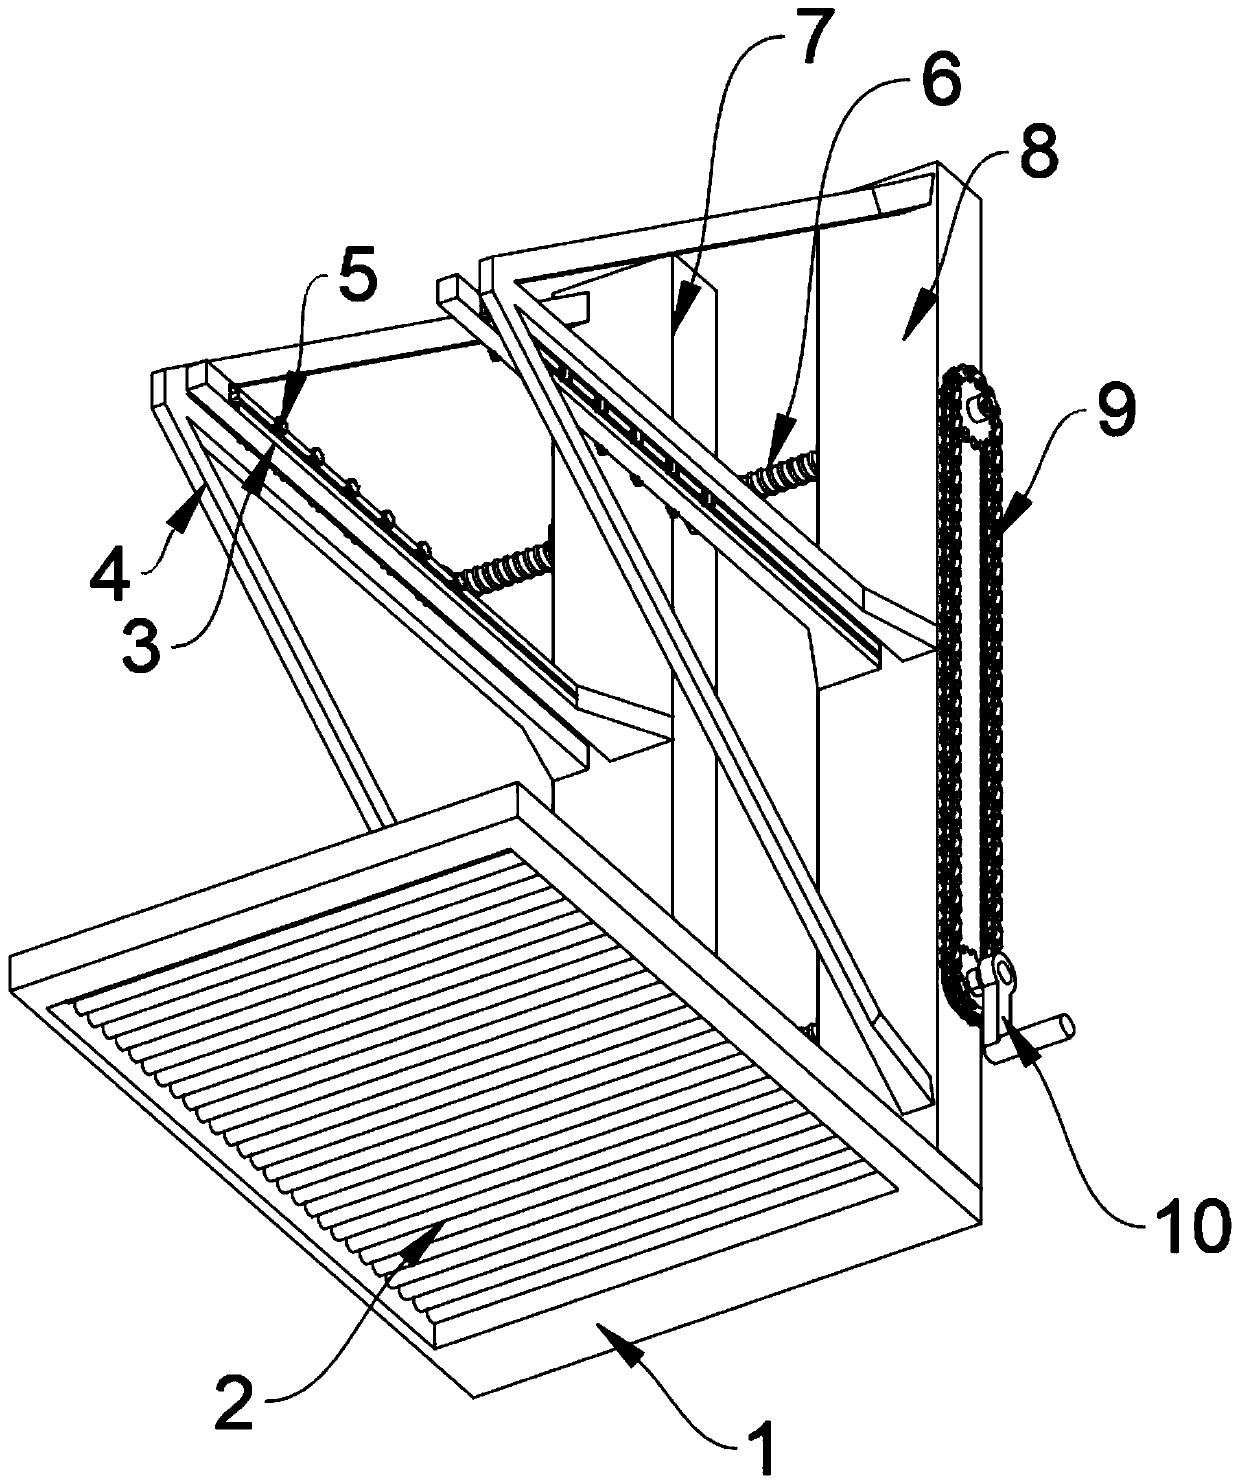 Positioning and welding integrated mechanism for building pouring frame